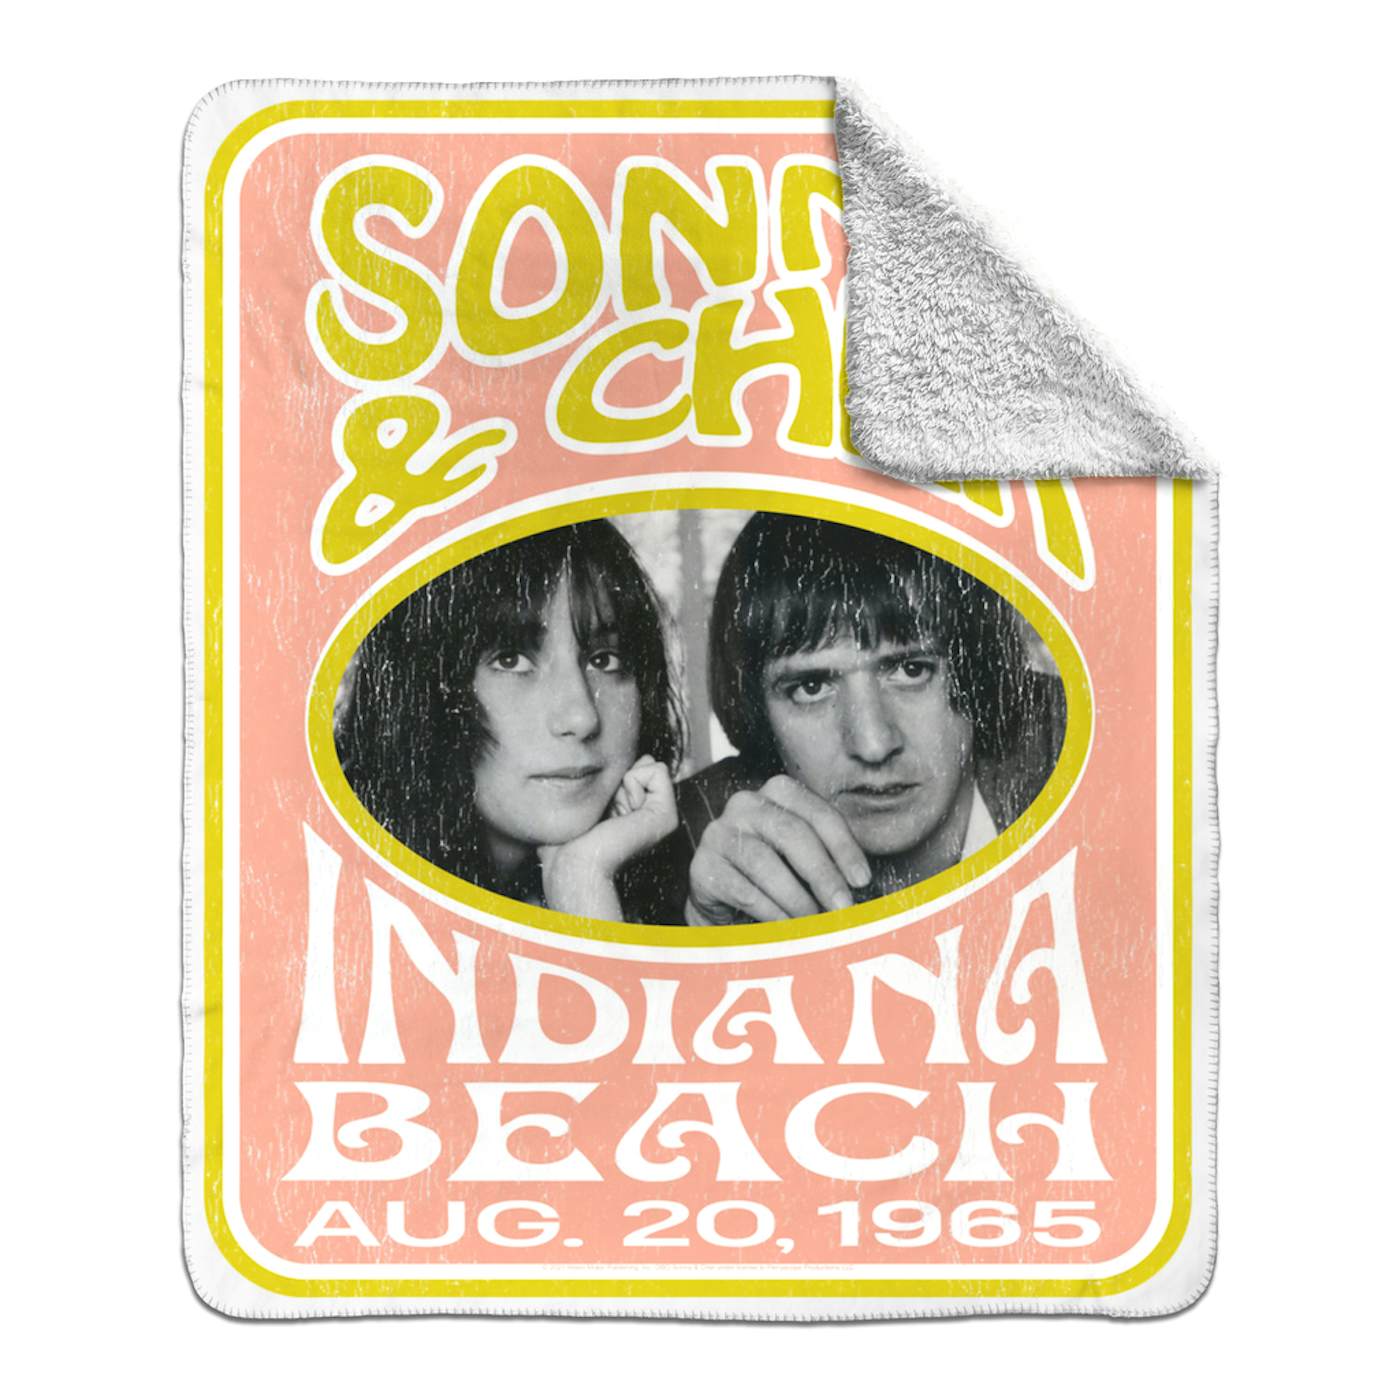 Sonny & Cher Sherpa Blanket | Indiana Beach Peach And Avocado Concert Banner Distressed Sonny and Cher Blanket (Merchbar Exclusive)